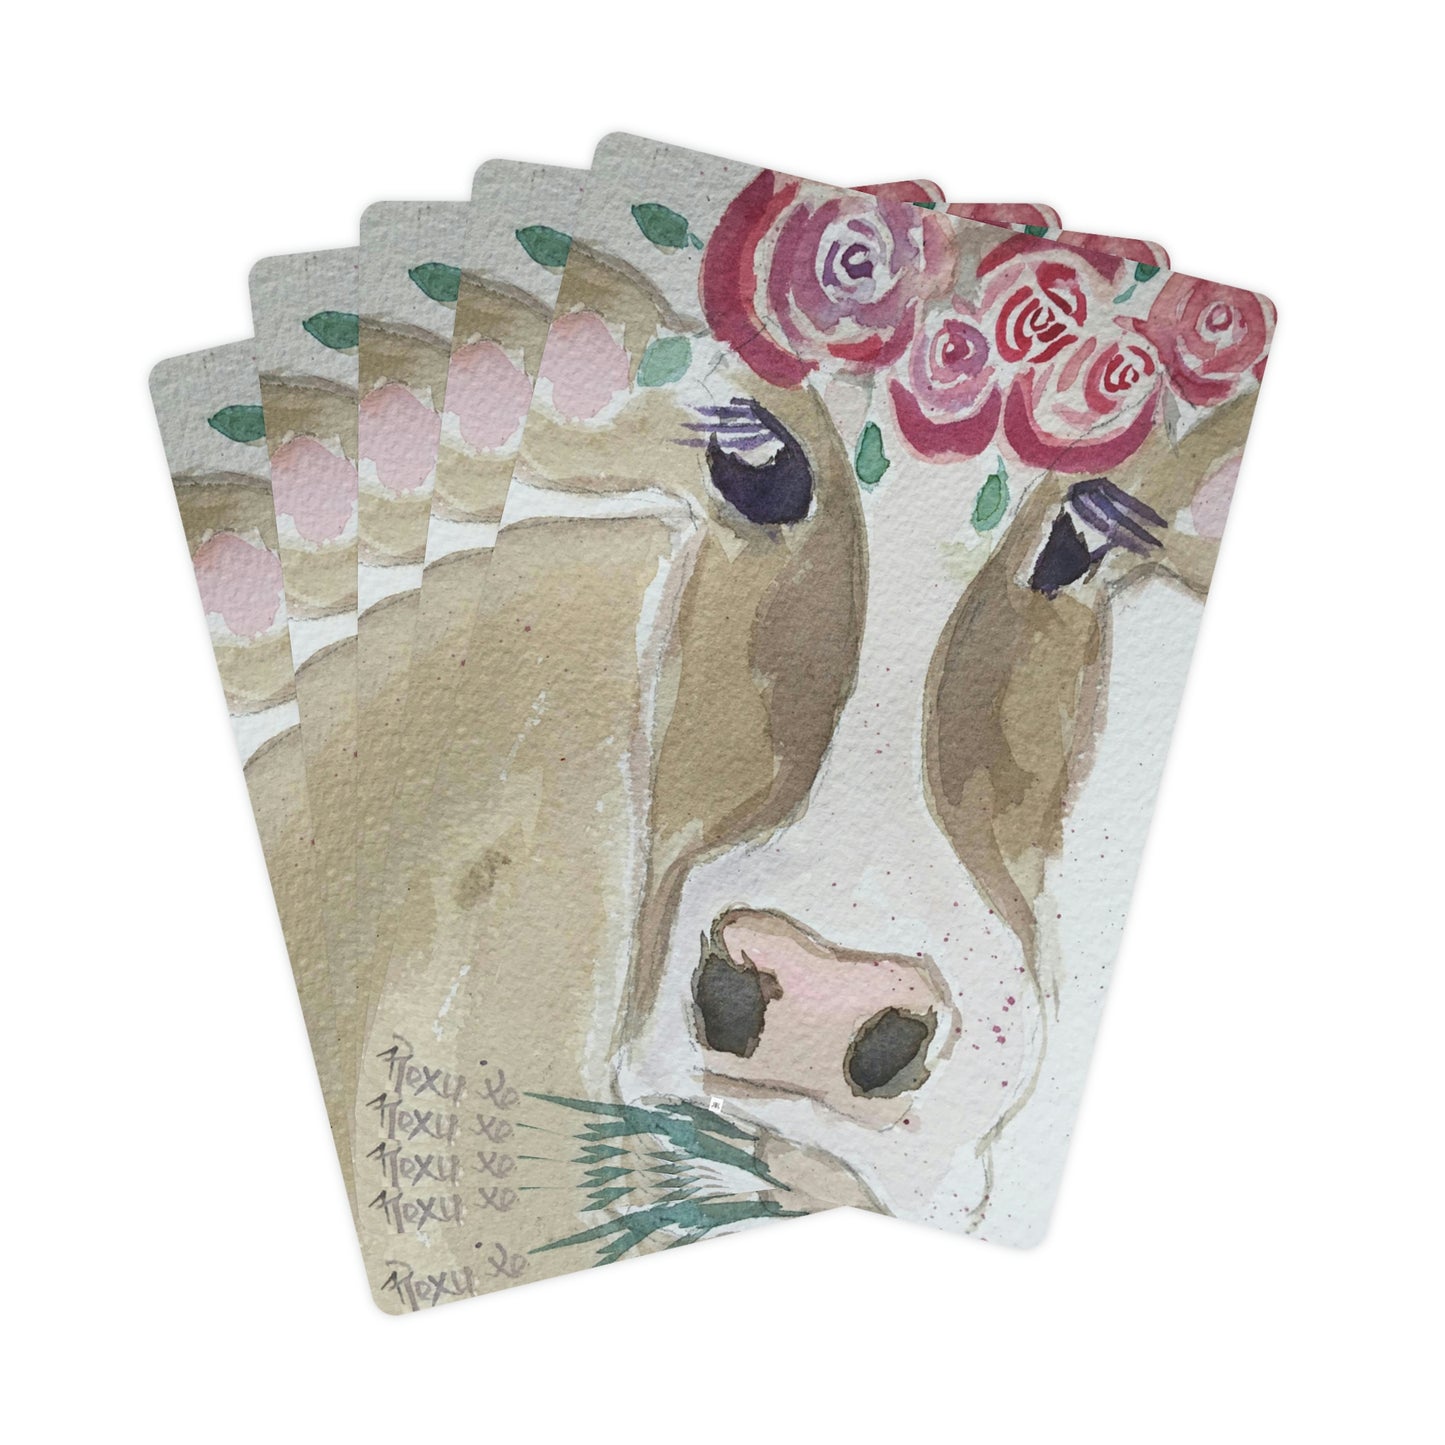 Henrietta- Whimsical Cow- Poker Cards/Playing Cards